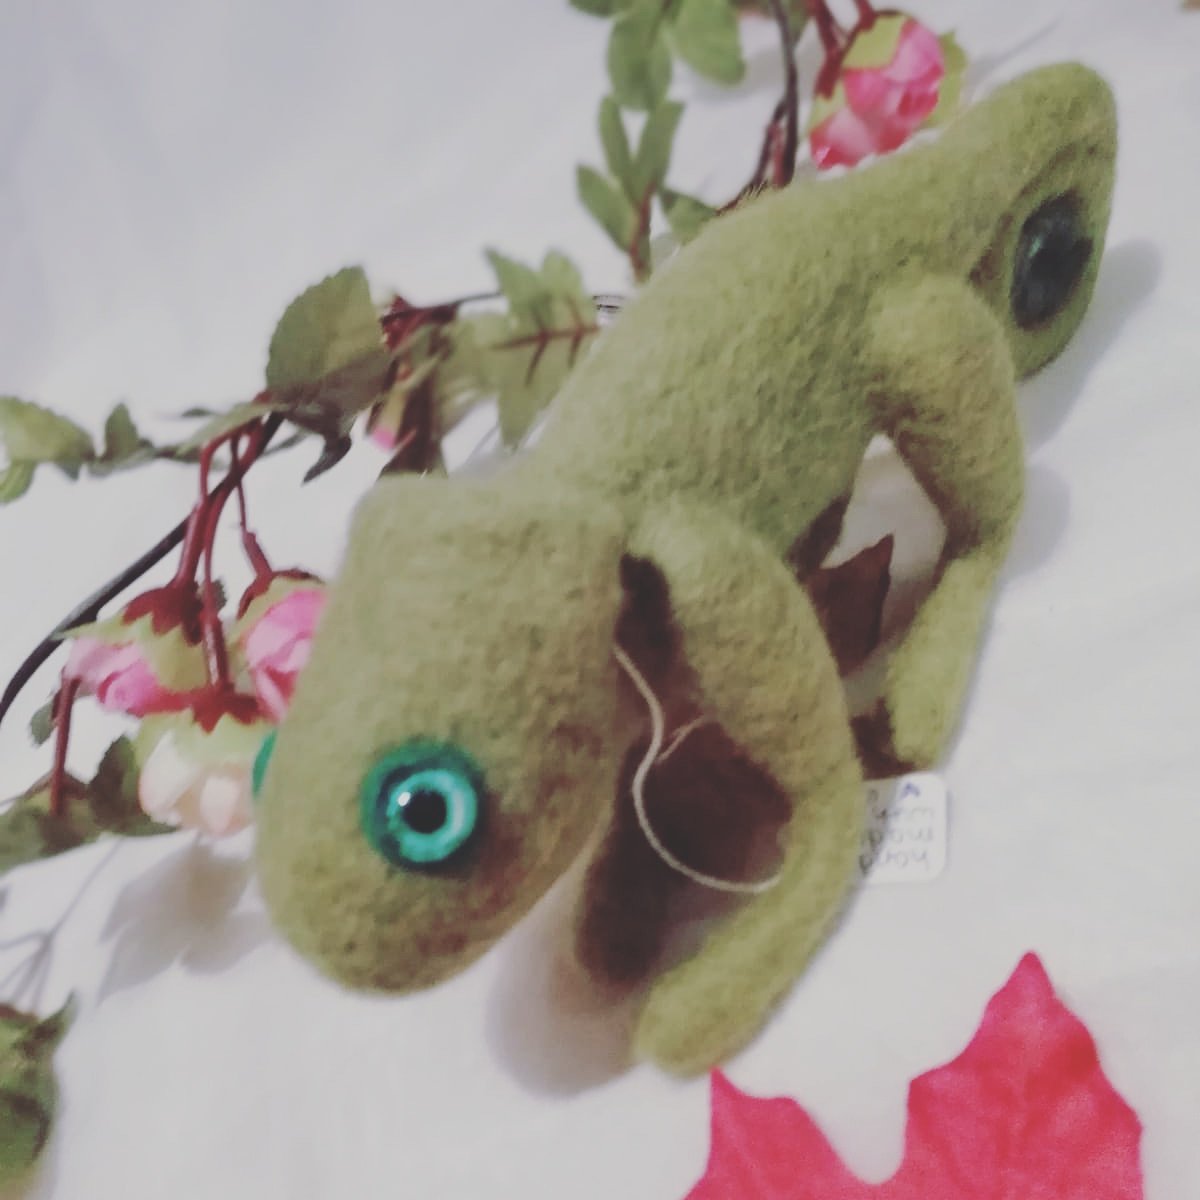 I've one space left before I close my books for christmas. Please pm if you'd like a commissioned piece for that special person. #needlefelted #chameleon. #OOAK #woolsculpture #thoughtfulgift #mixedmedia #uniquegifts #ChristmasIsComing